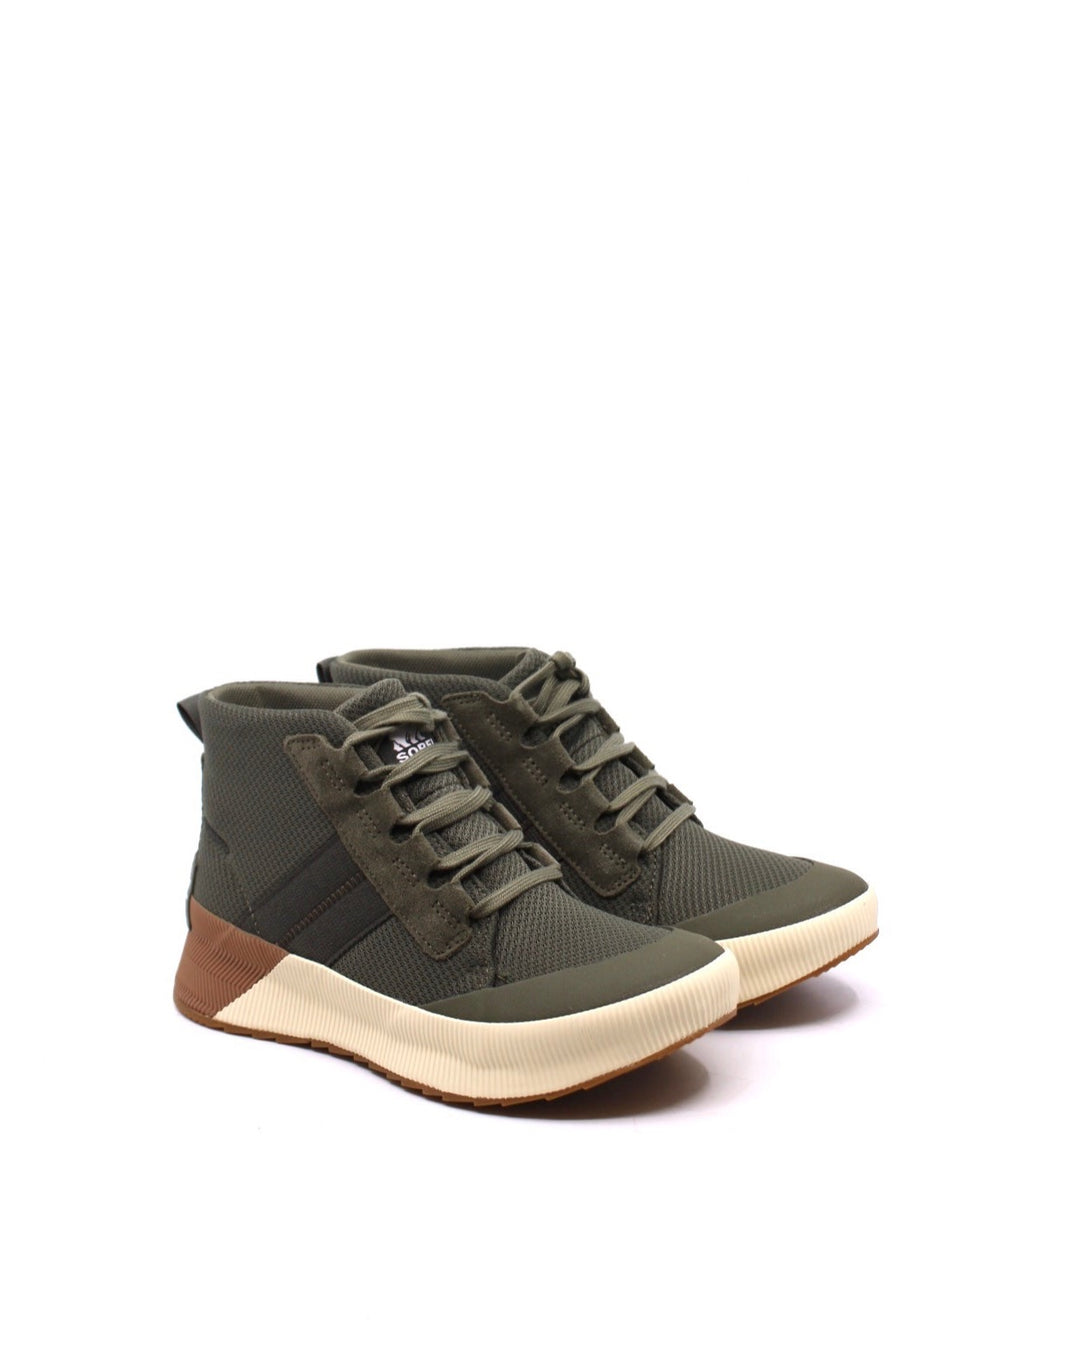 Sorel Out 'N About III Mid Sneaker WP Stone Green/Gum - Dear Lucy